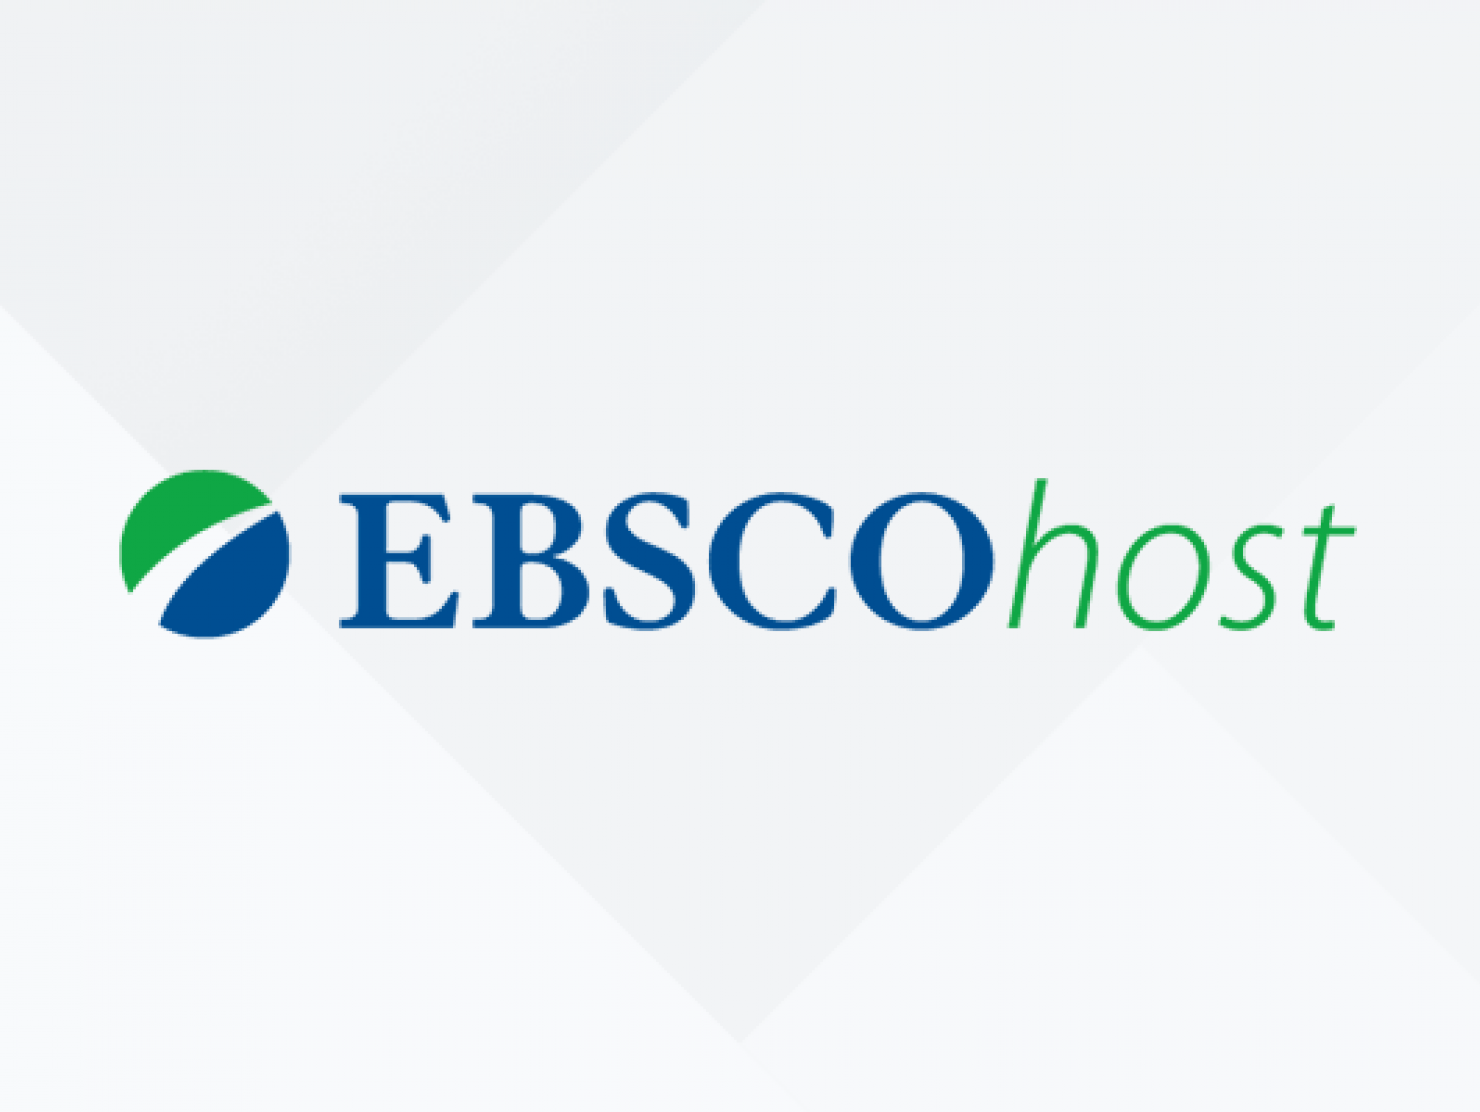 MasterFILE Complete at EBSCOhost